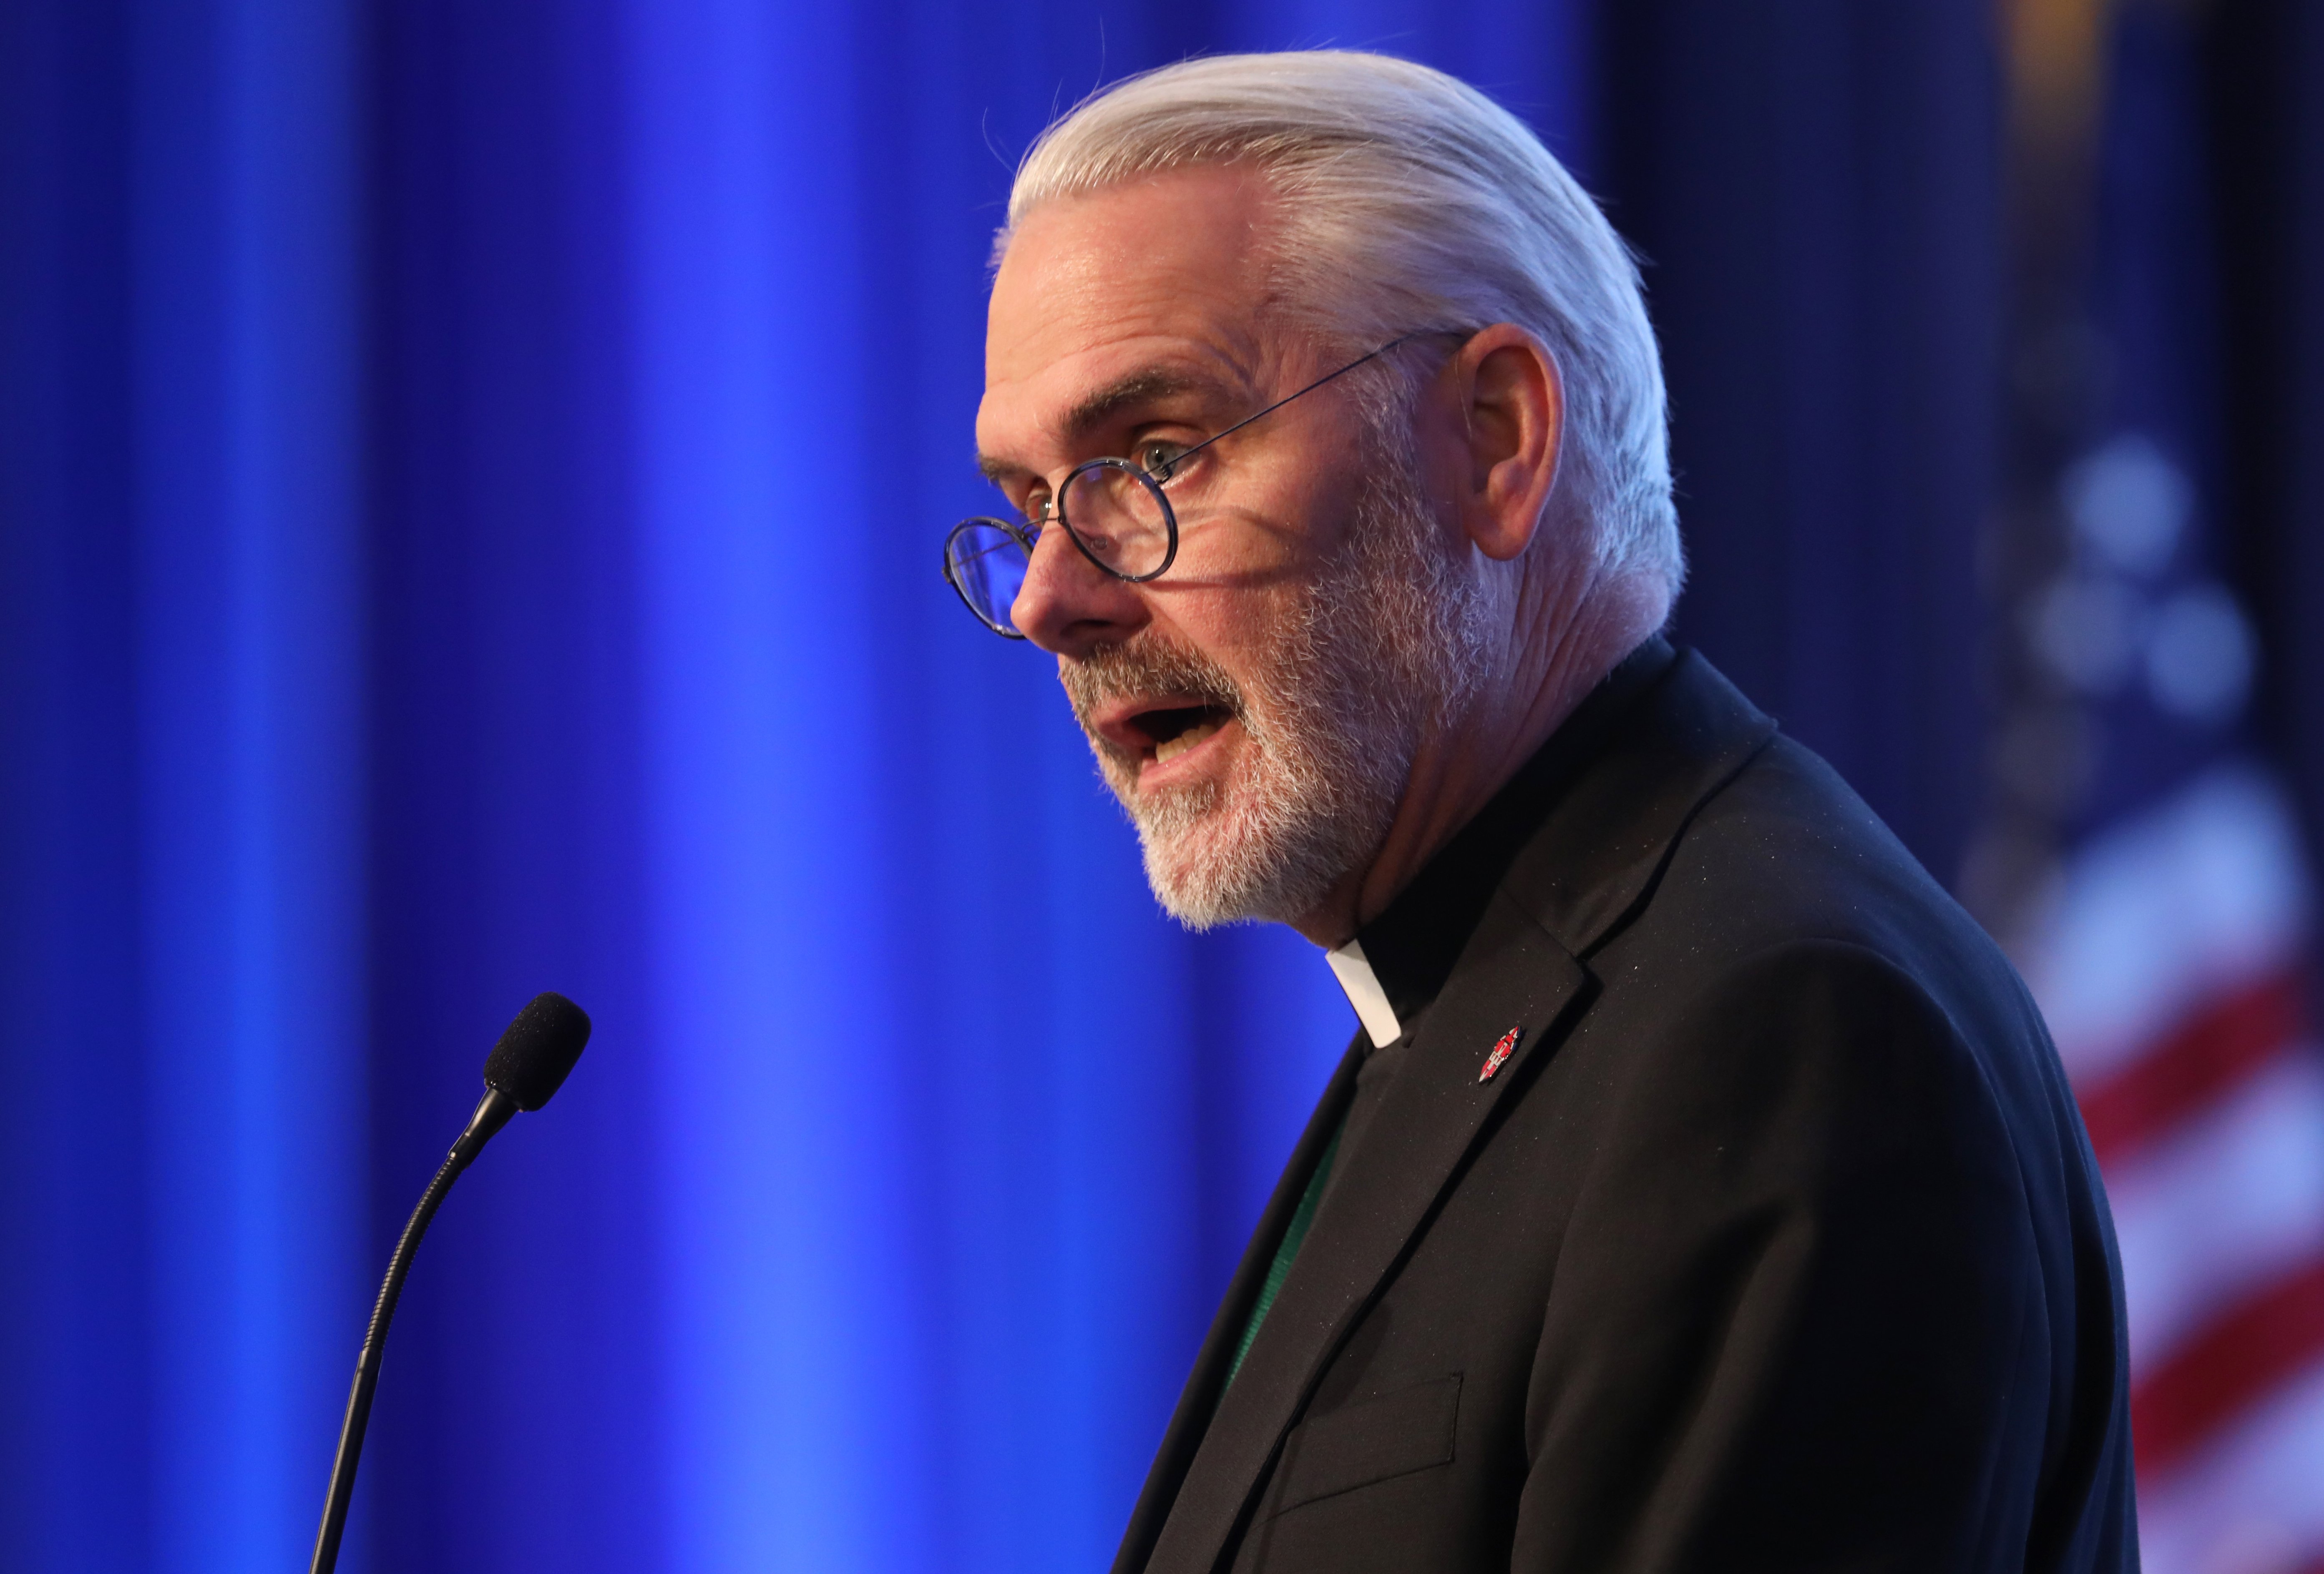 Oklahoma City Archbishop Paul Coakley, chairman of the U.S. Conference of Catholic Bishops' Committee on Domestic Justice and Human Development, speaks at a Nov. 16 session of the fall general assembly of the U.S. bishops in Baltimore. (CNS/Bob Roller)